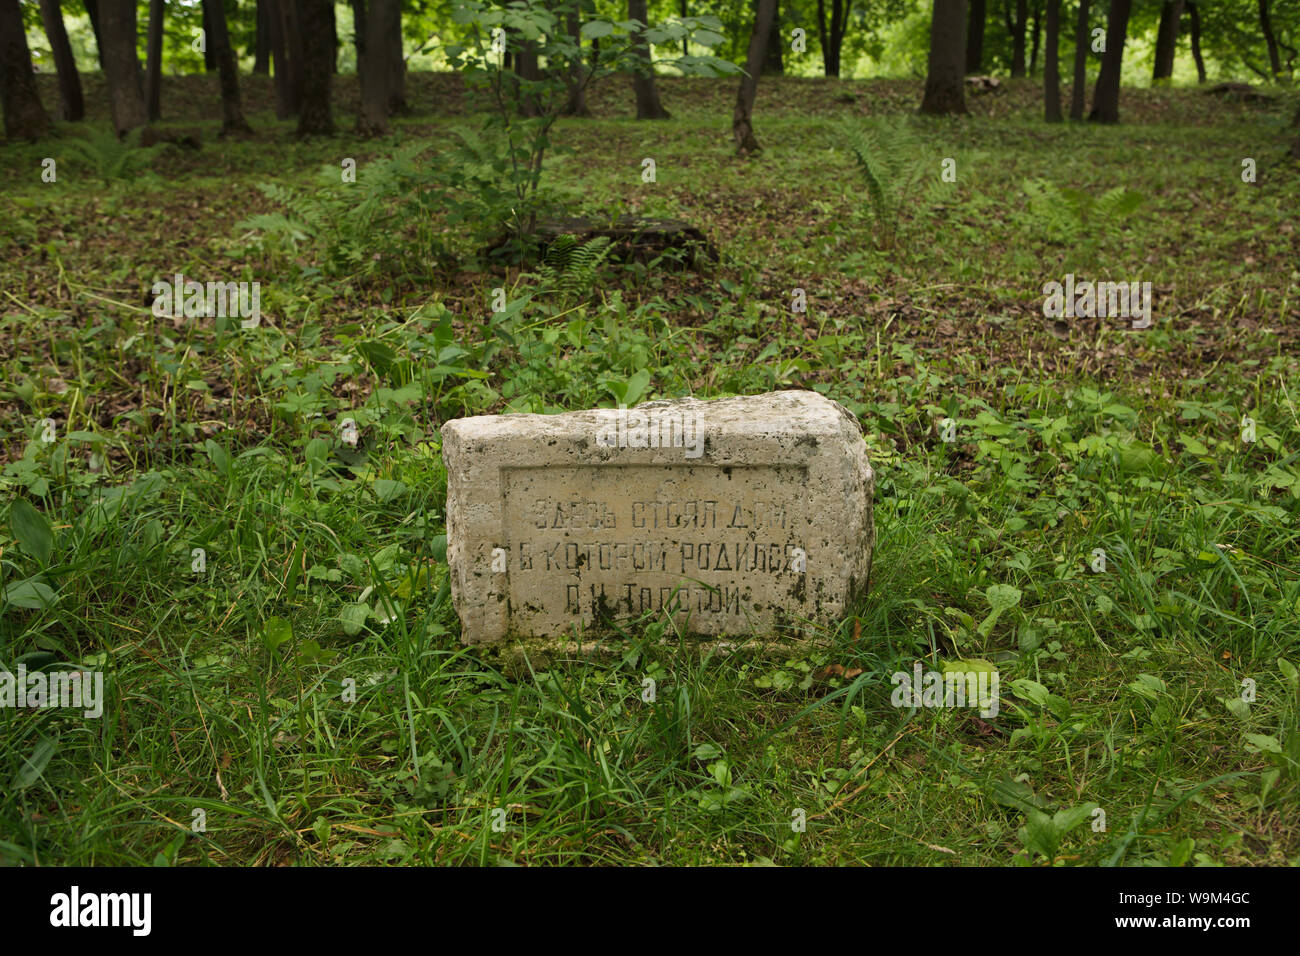 Memorial stone on the place where Russian writer Leo Tolstoy was born in the house which once stood on this place in the Leo Tolstoy memorial estate in Yasnaya Polyana near Tula, Russia. Text in Russian means: The house once stood here where Leo Tolstoy was born. Stock Photo